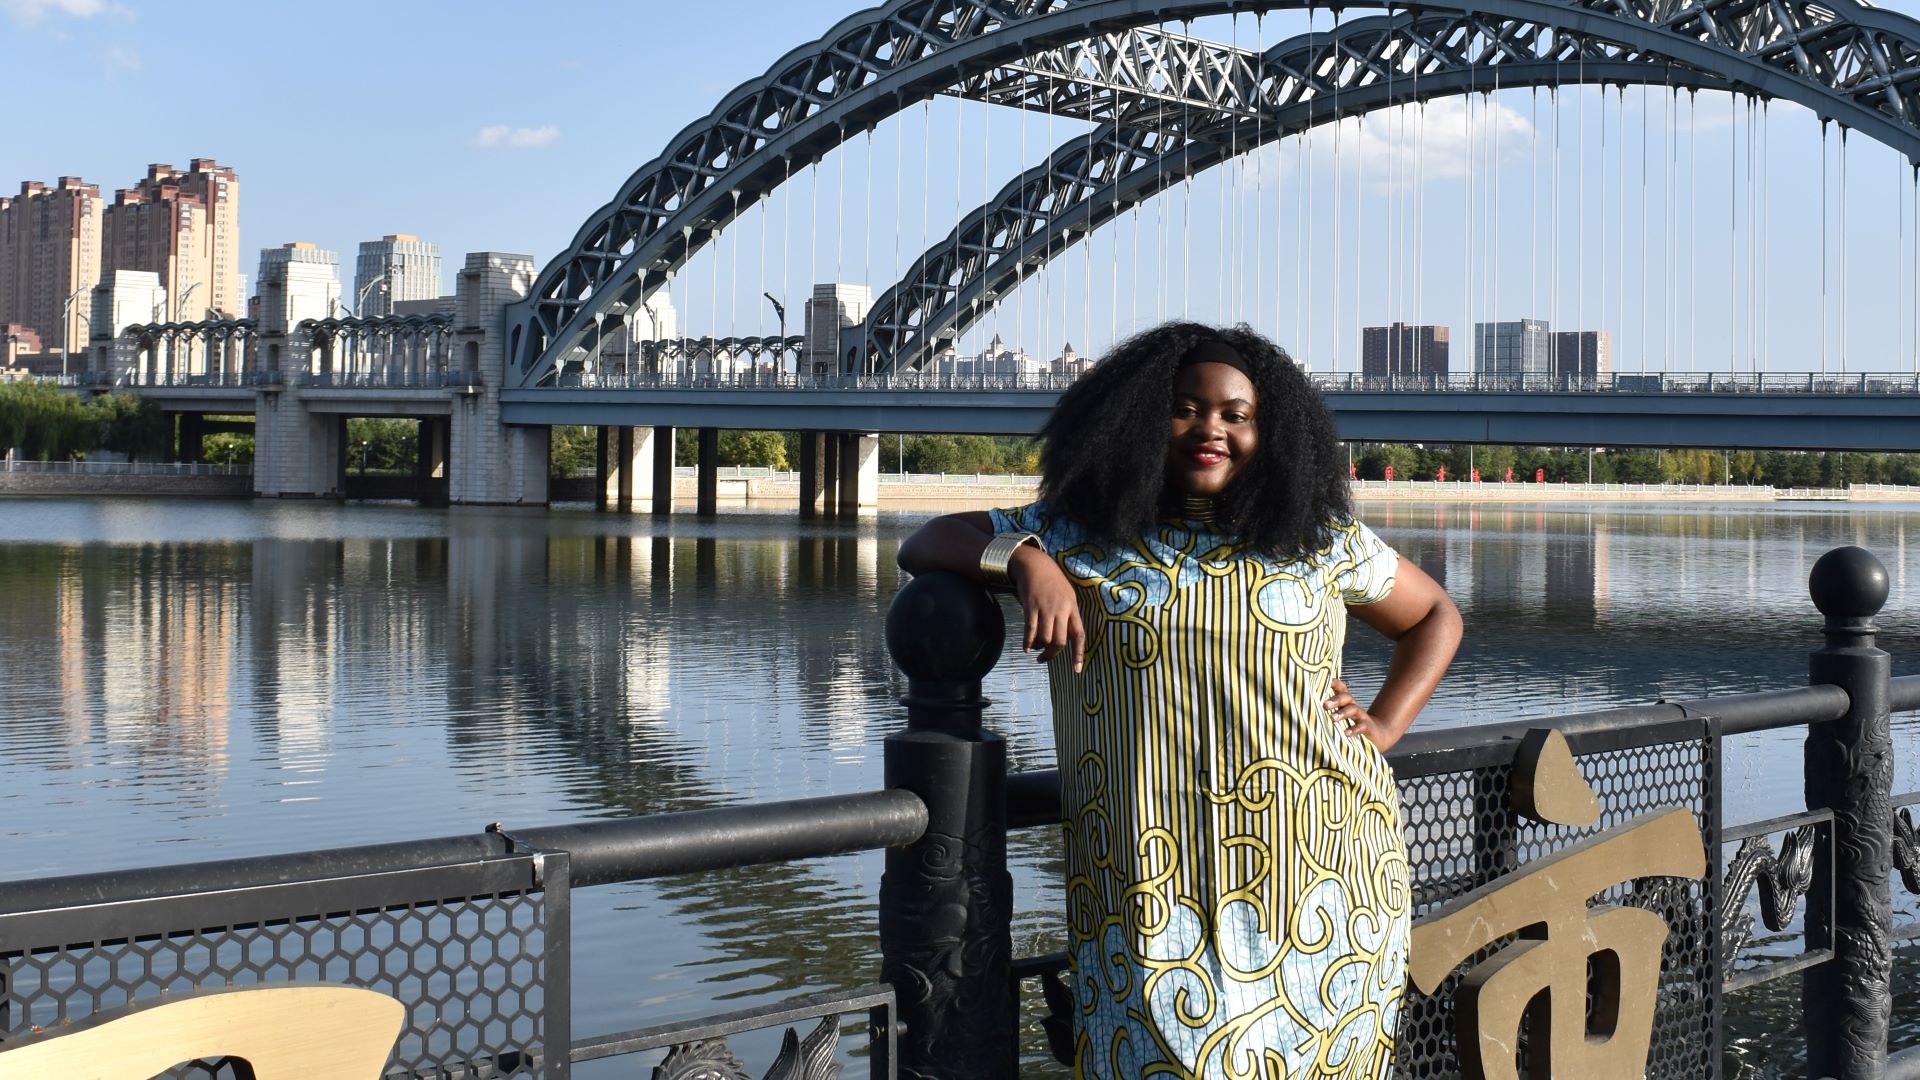 Frances Agba wearing a colourful dress and standing on a bridge.